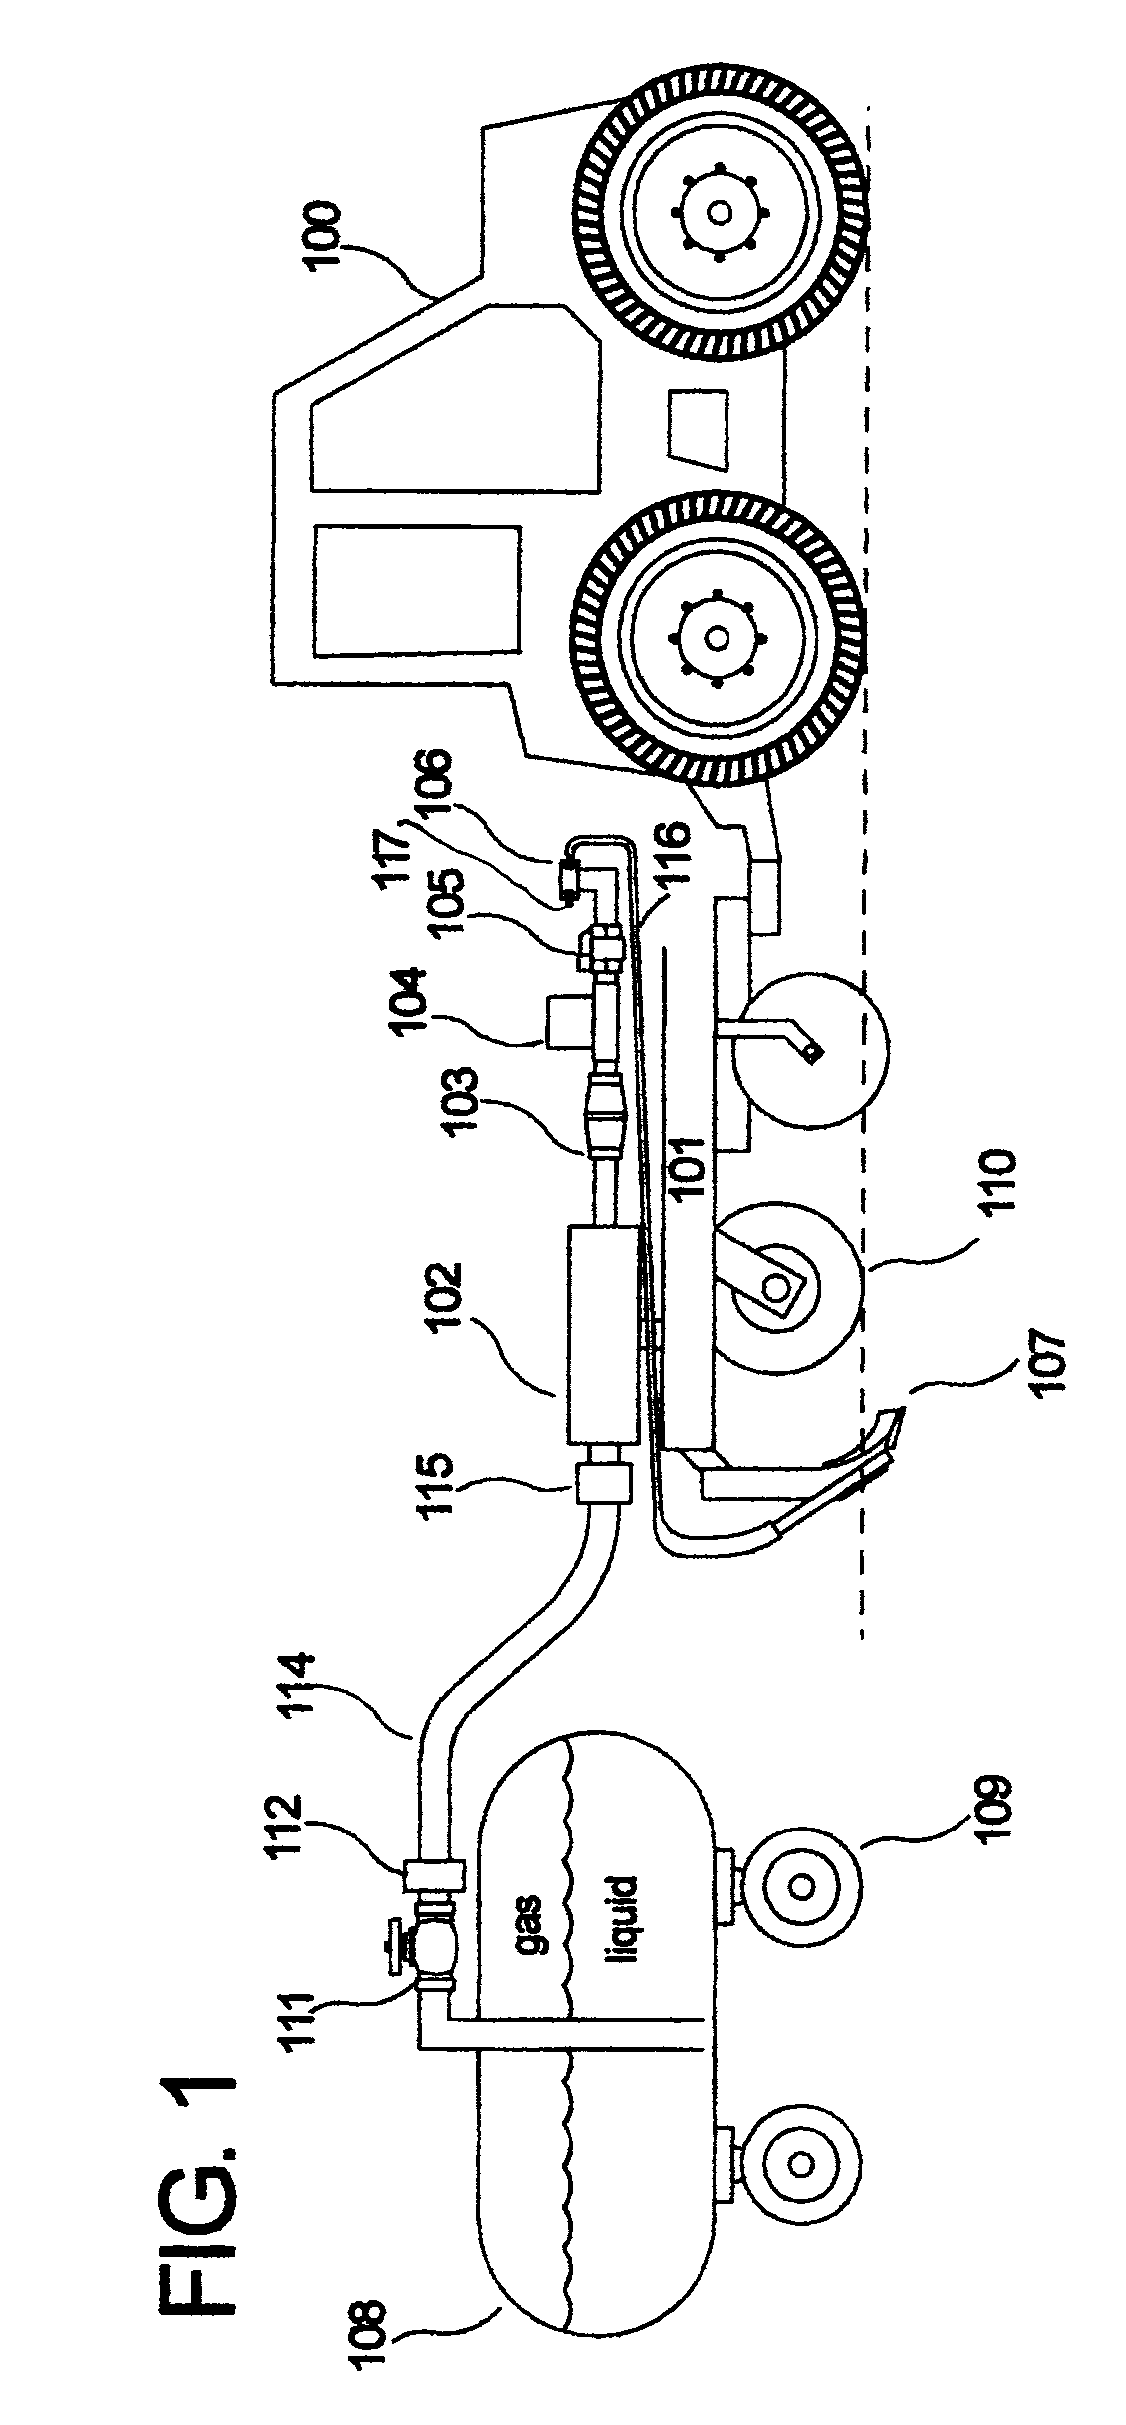 Apparatus for prevention of freezing of soil and crop residue to knife applying liquid anhydrous ammonia to the ground